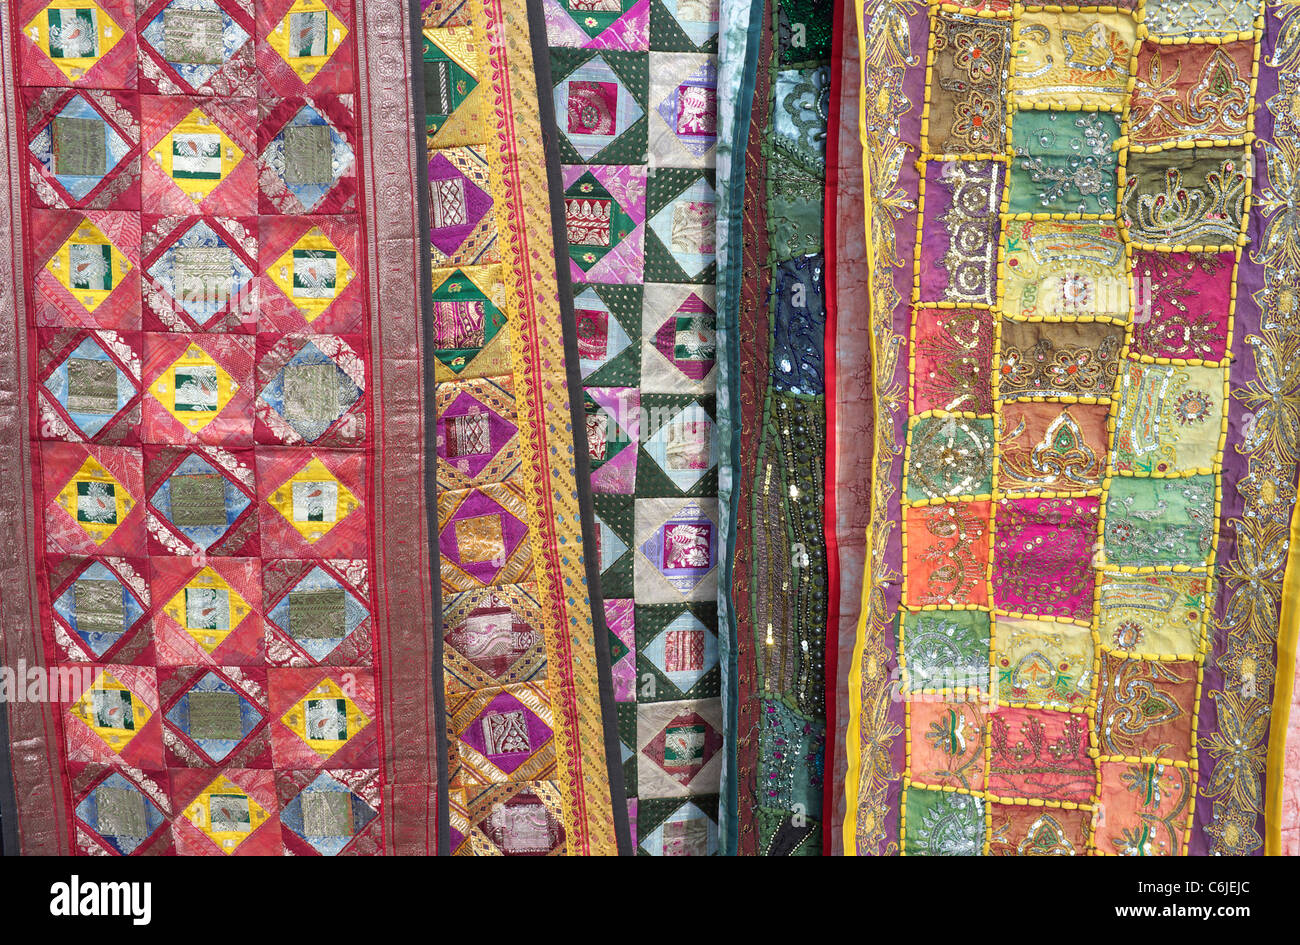 Patchwork quilts hanging in a market Stock Photo